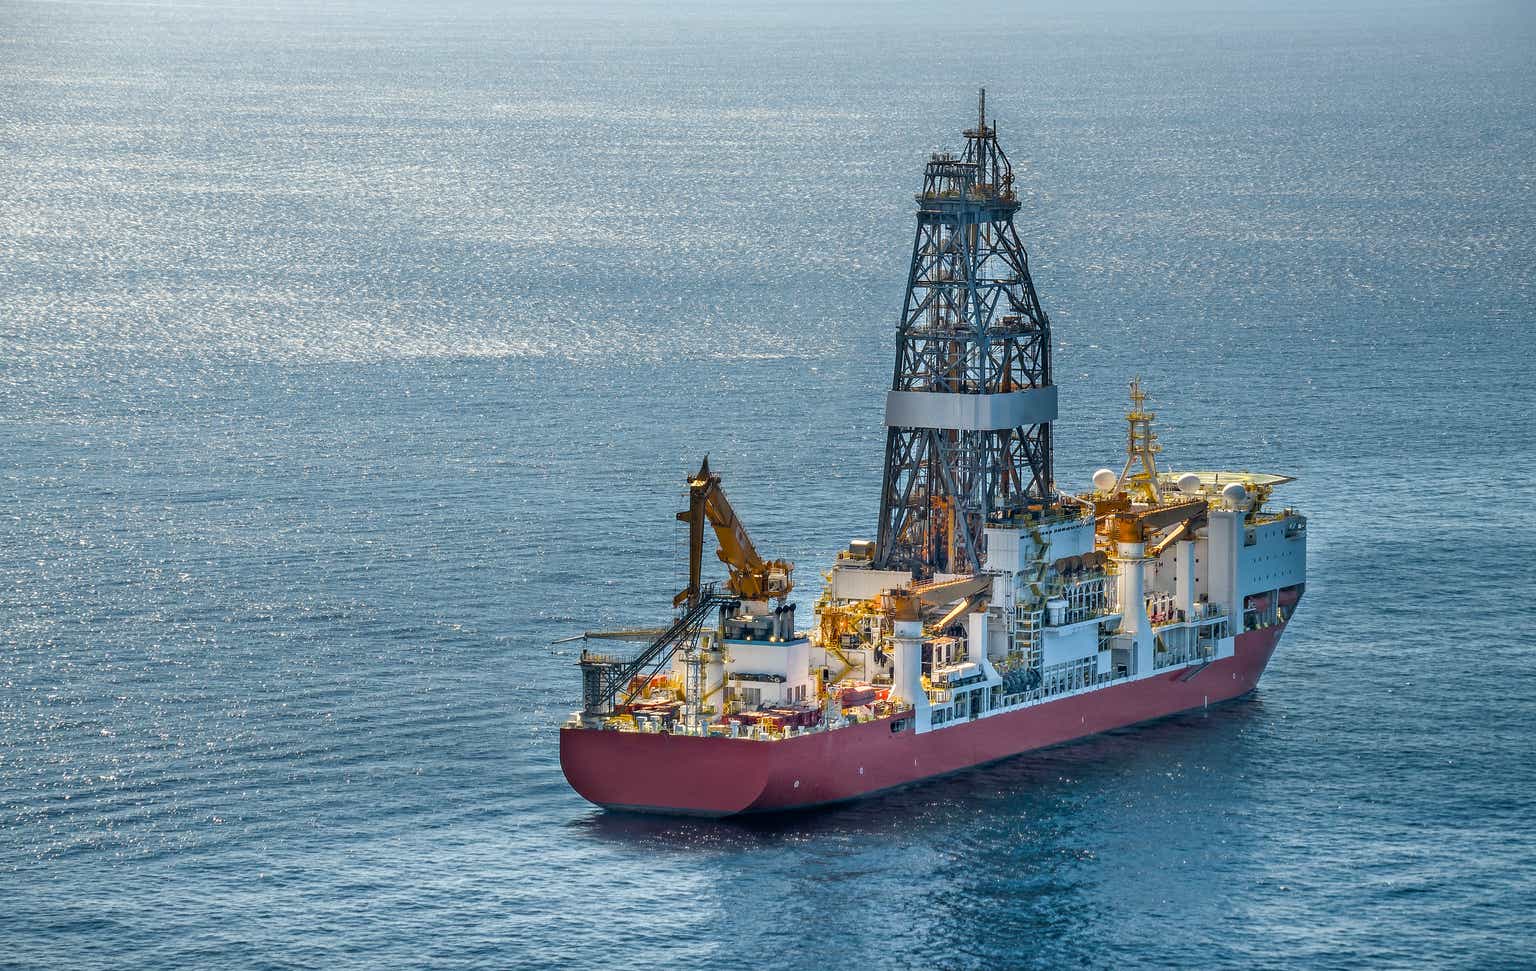 Transocean Continues To Face Challenges With Profitability (NYSE:RIG)